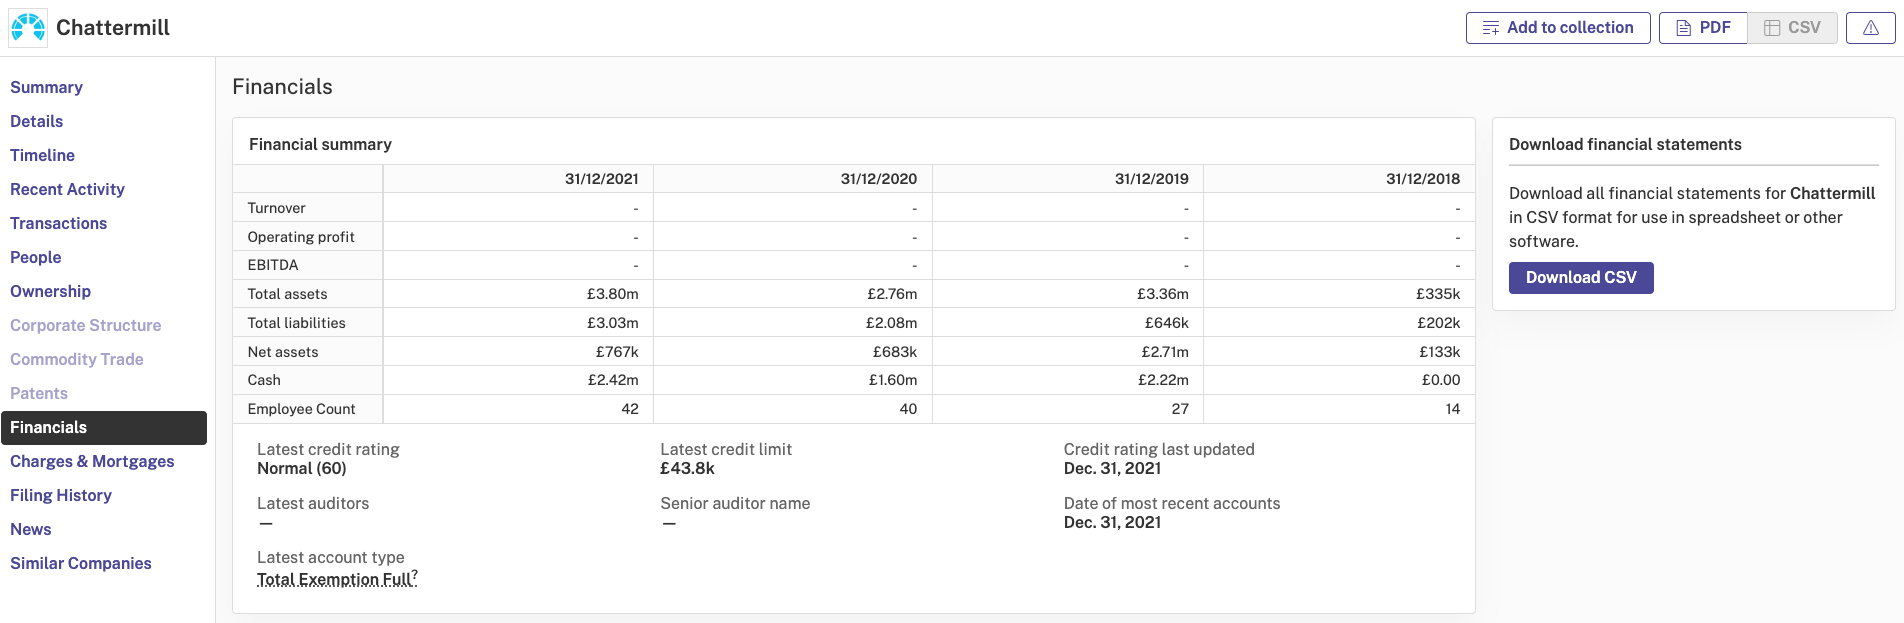 Chattermill: Financial Summary